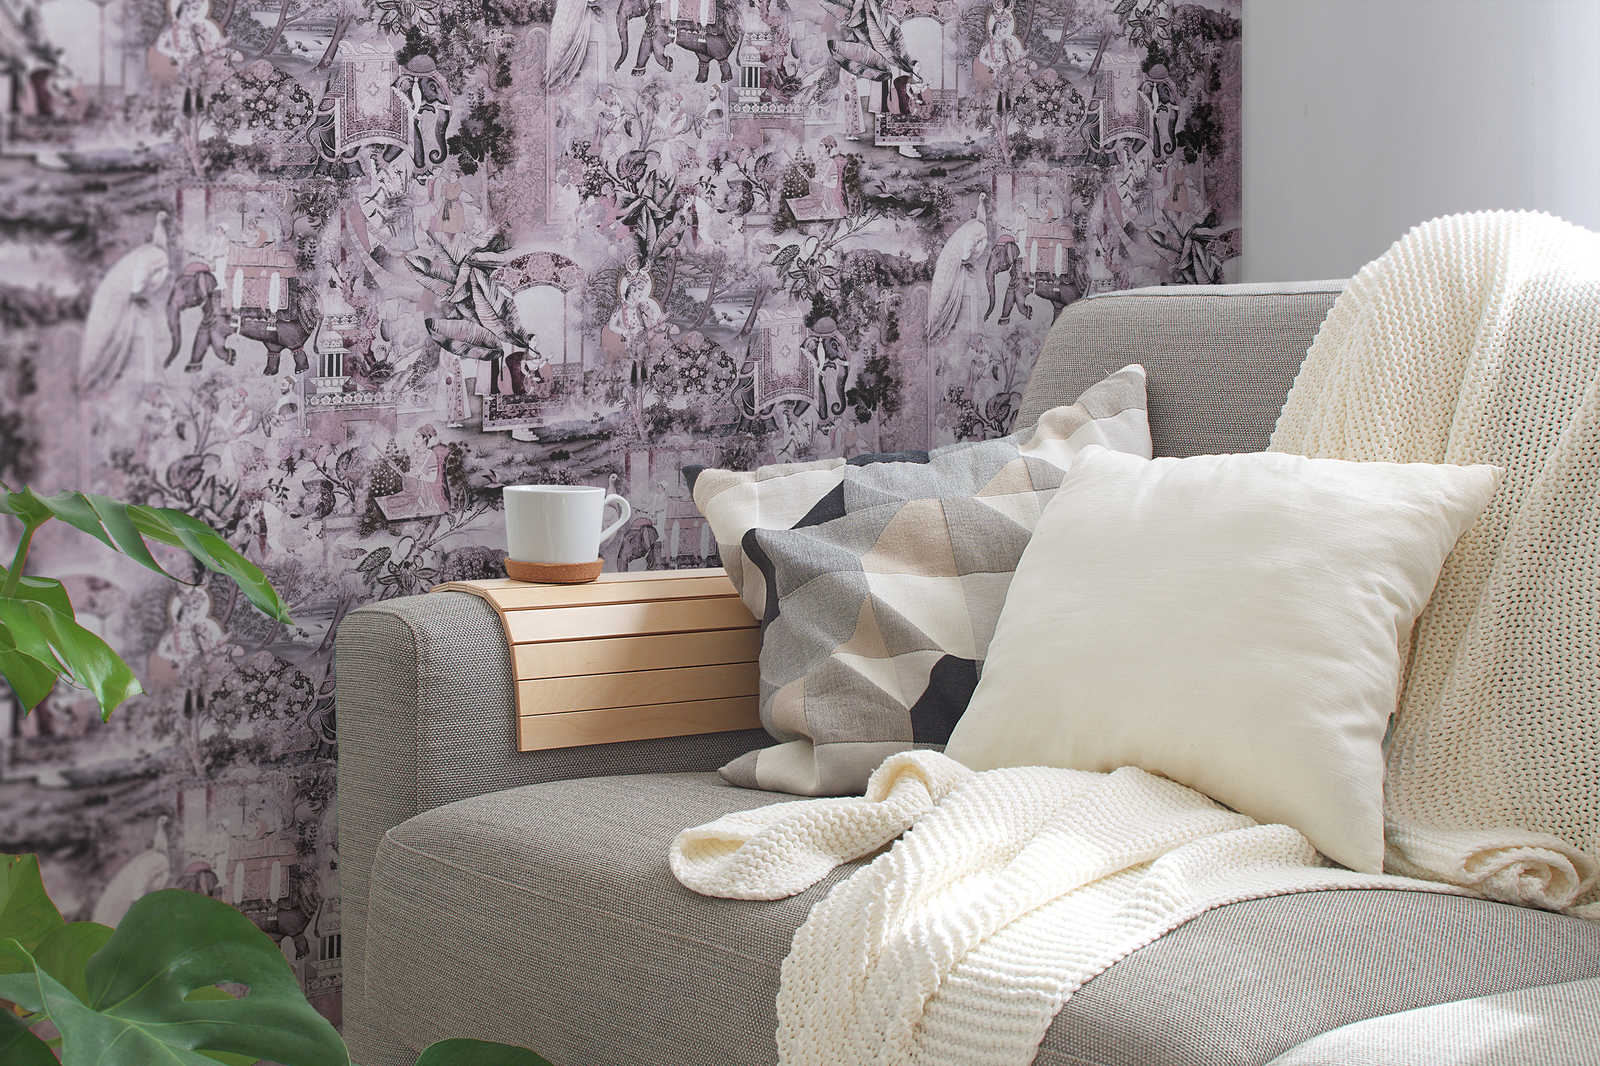             Non-woven wallpaper India with elephant & vintage pattern - pink, grey
        